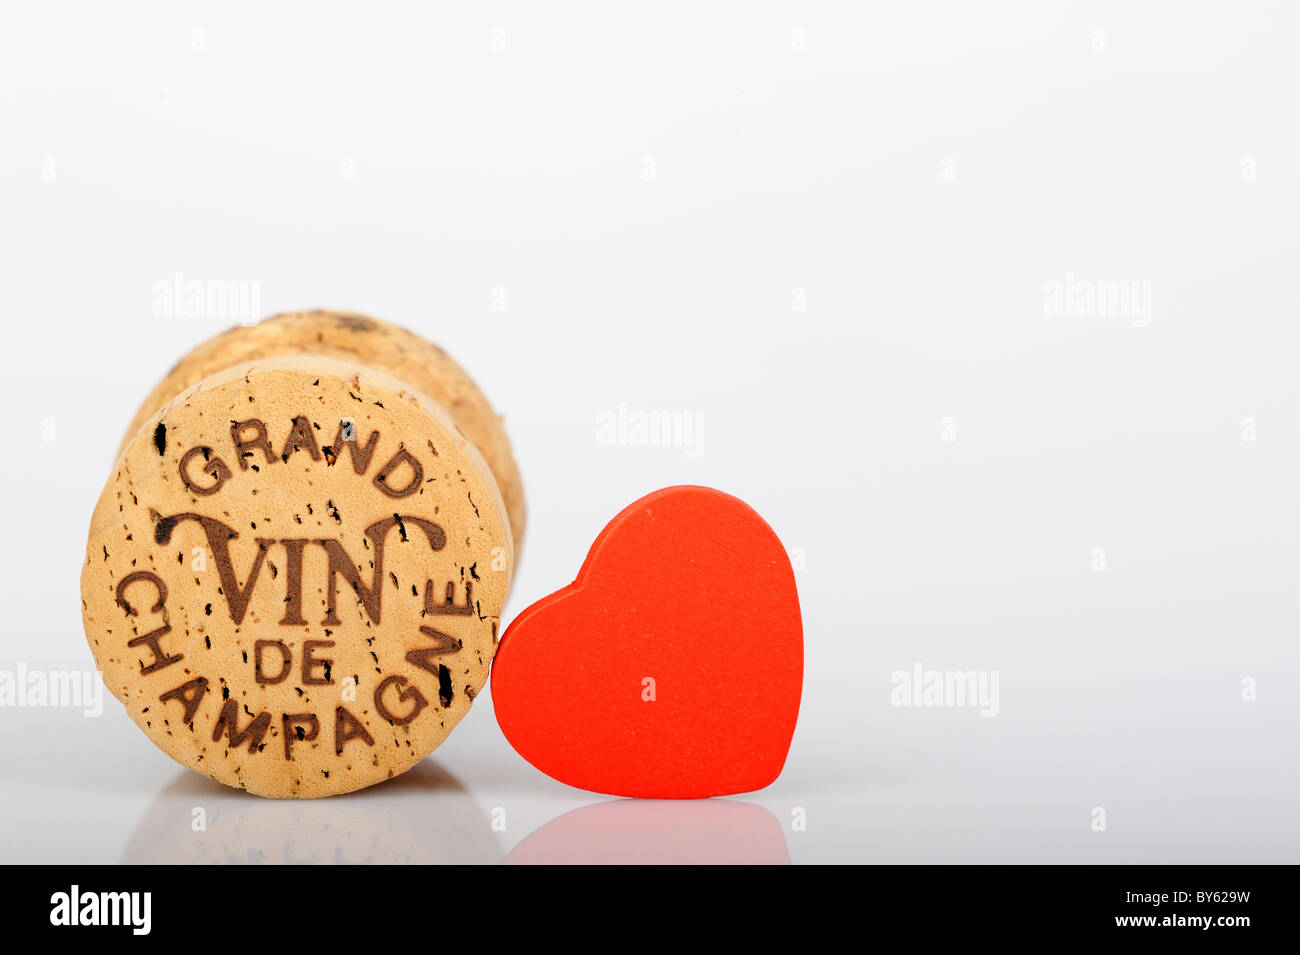 Stock photo of a champagne cork shot against a white background. Stock Photo